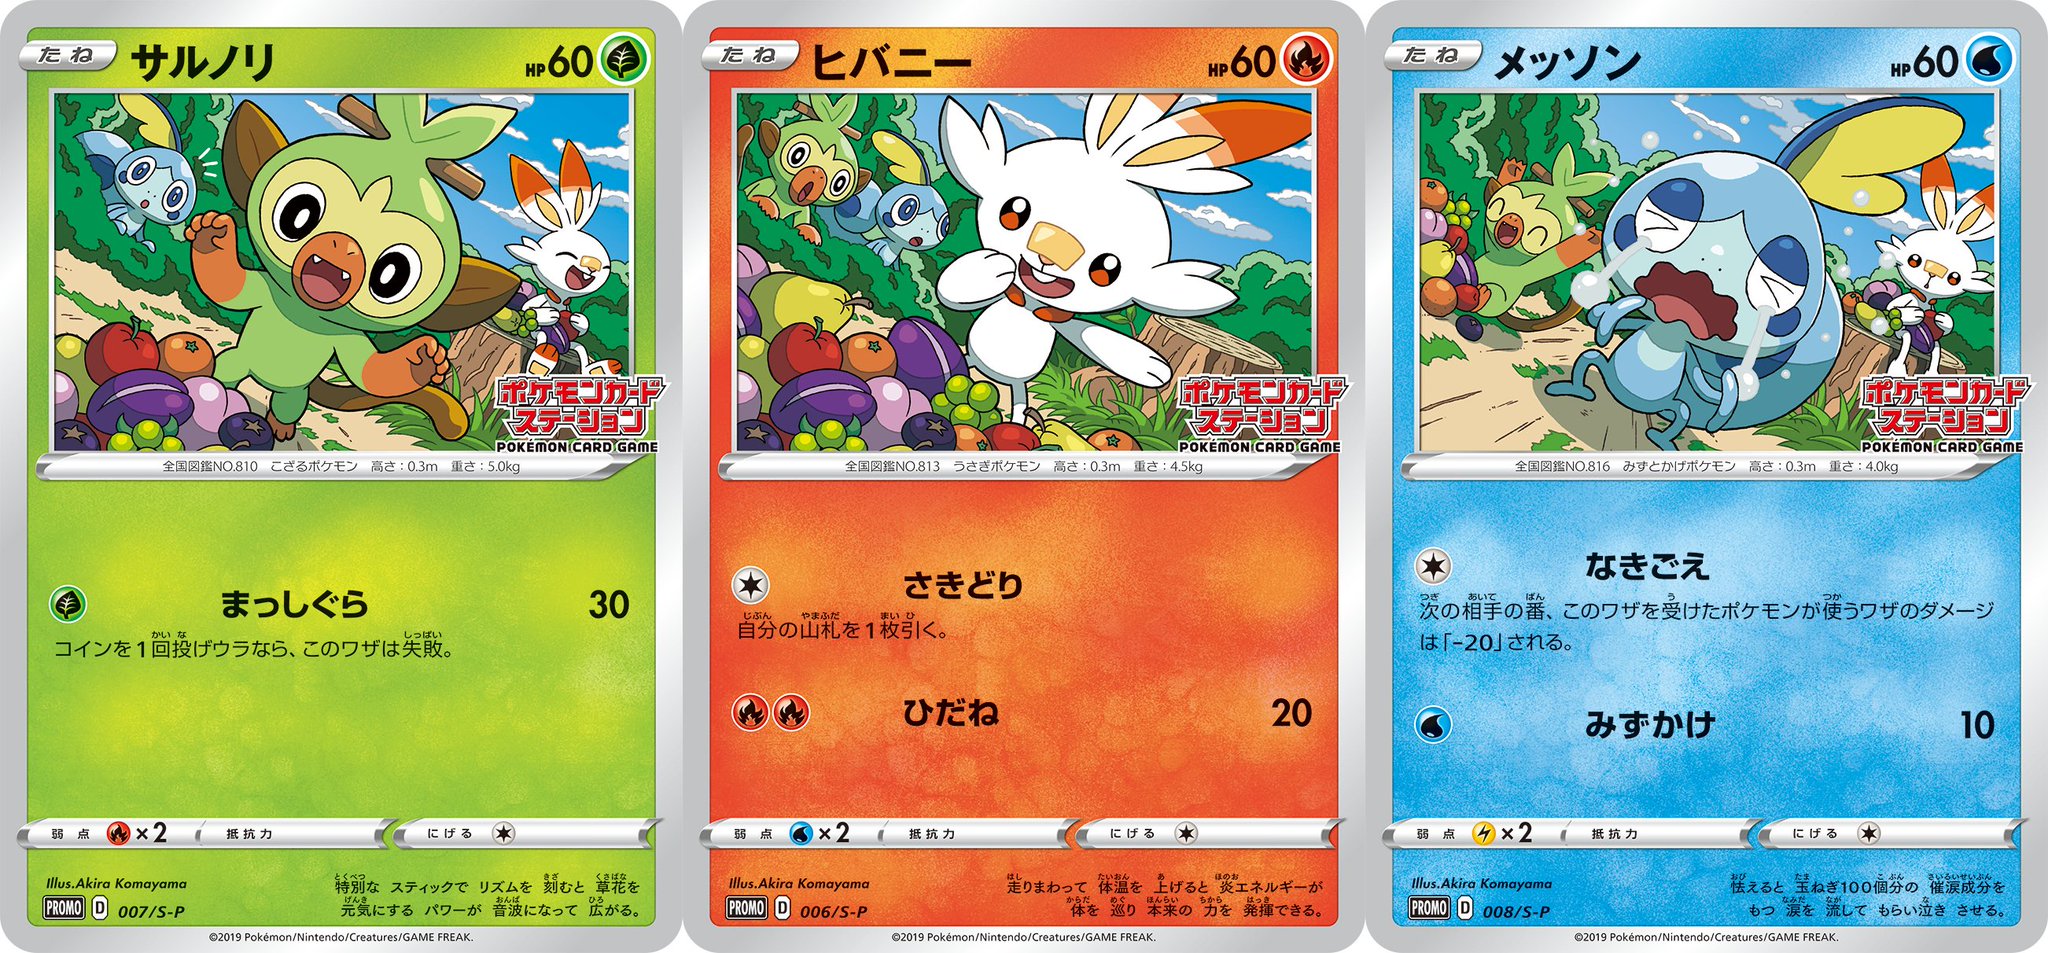 Pokeguardian Com Grookey Scorbunny Sobble Pokemon Card Station Promo Cards Have Been Revealed Read More On Pokeguardian T Co Kgmgr4d3ak T Co Us1bynqy4y